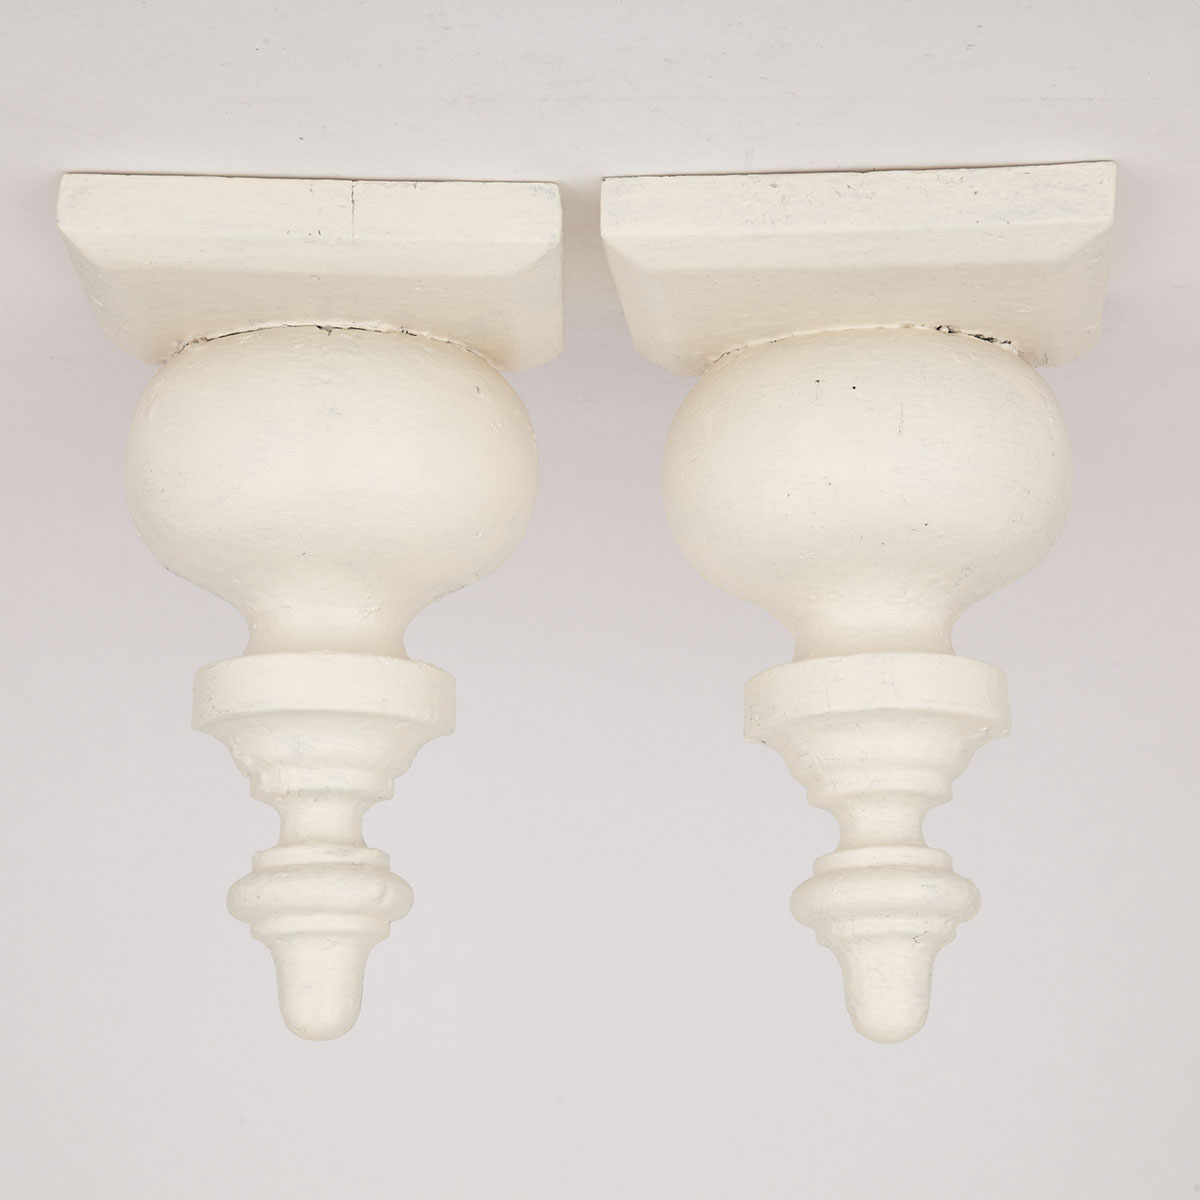 Pair of Turned and Painted Corbel Brackets, 19th century